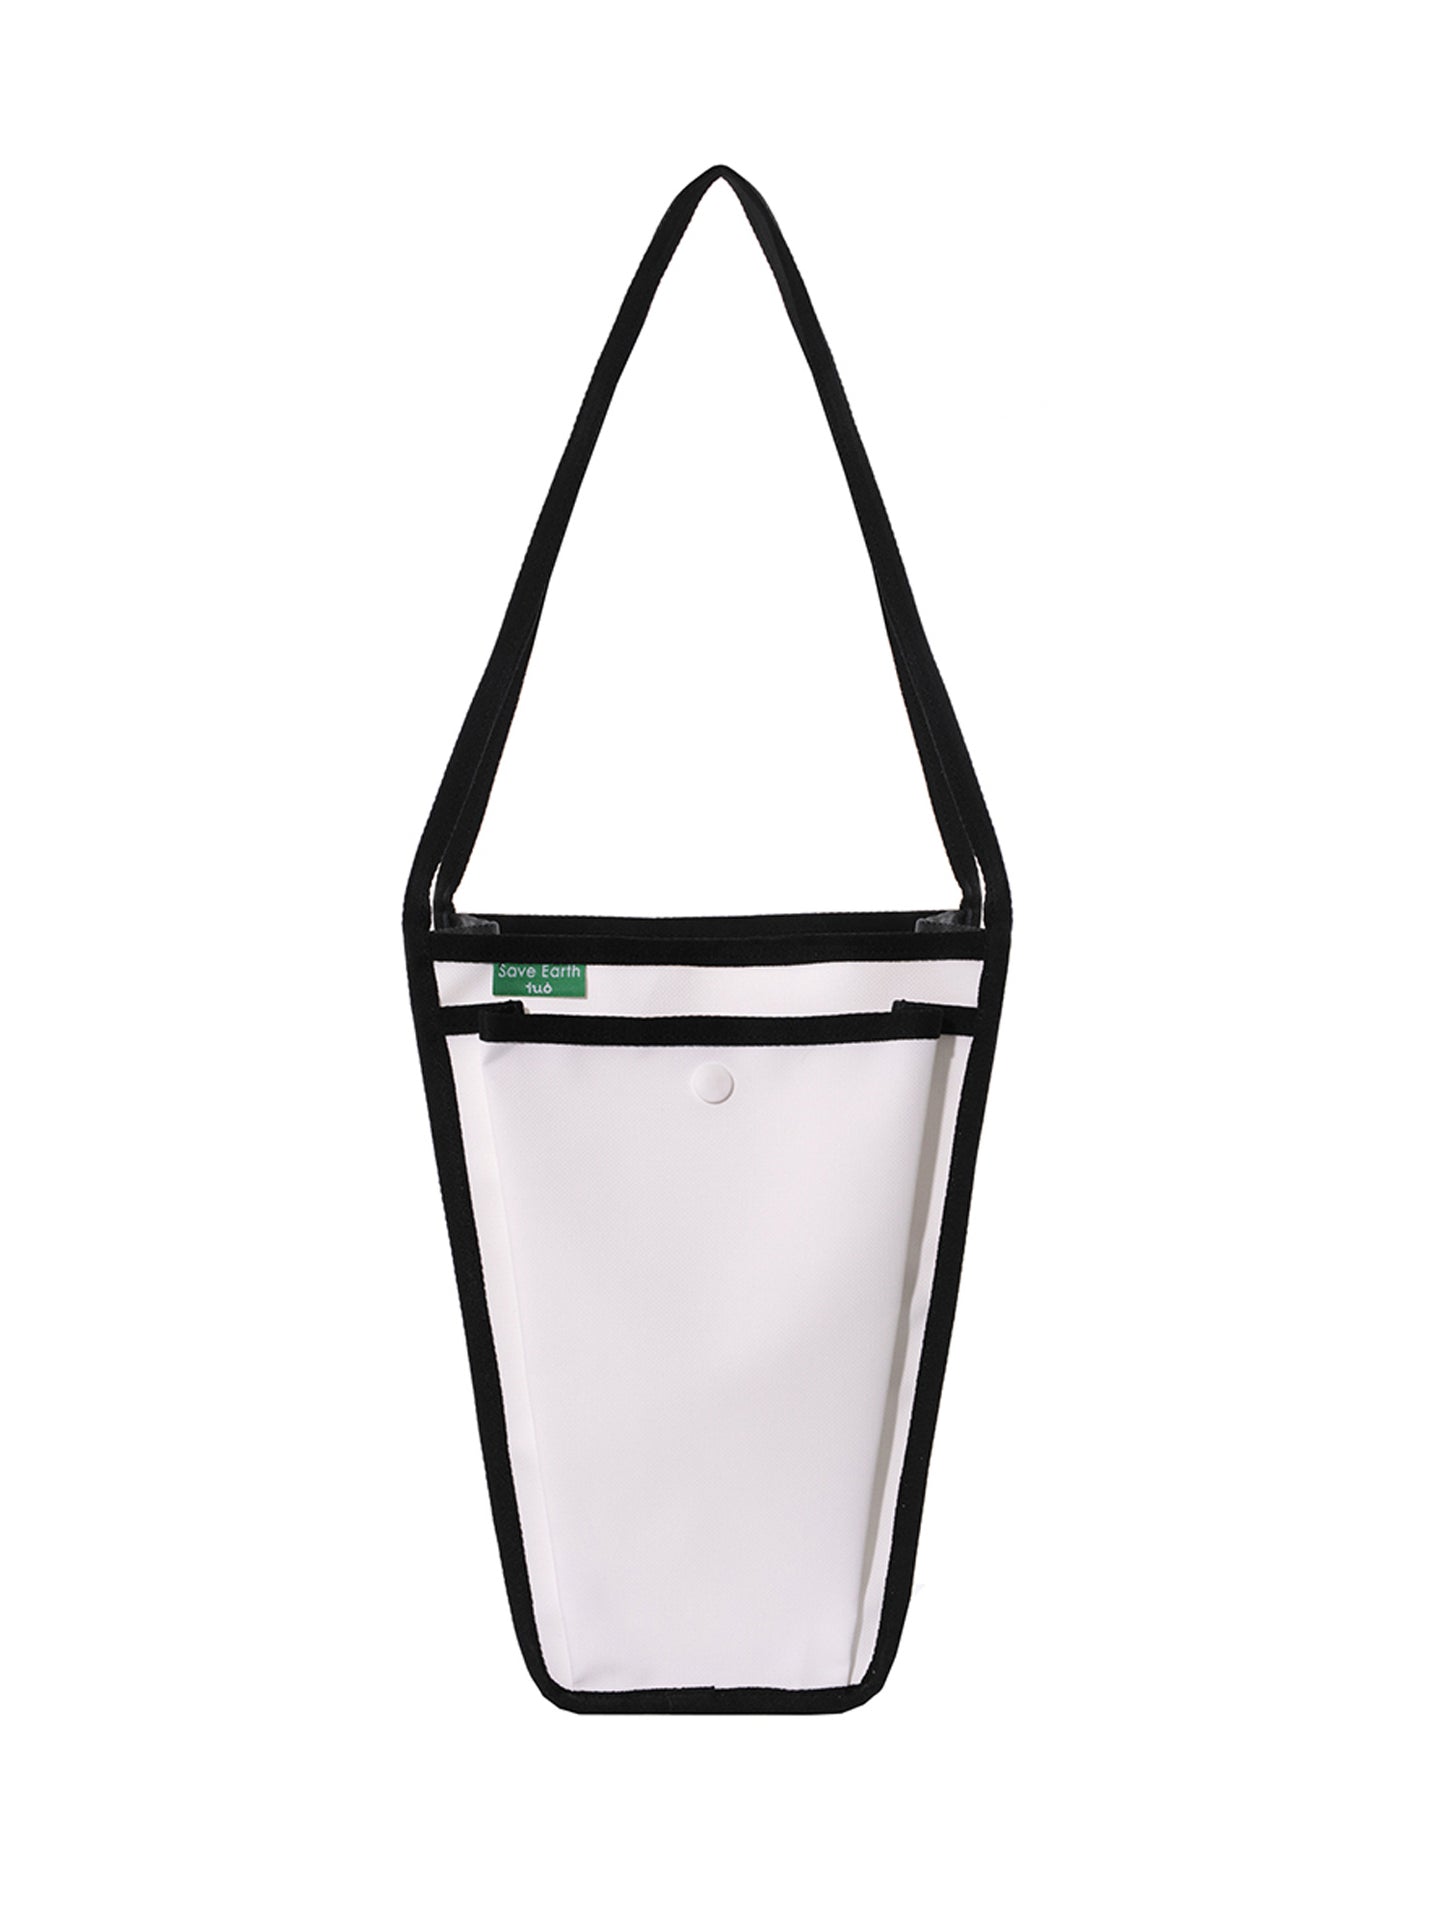 TUO - [SAVE THE EARTH] VASE WHITE BLACK